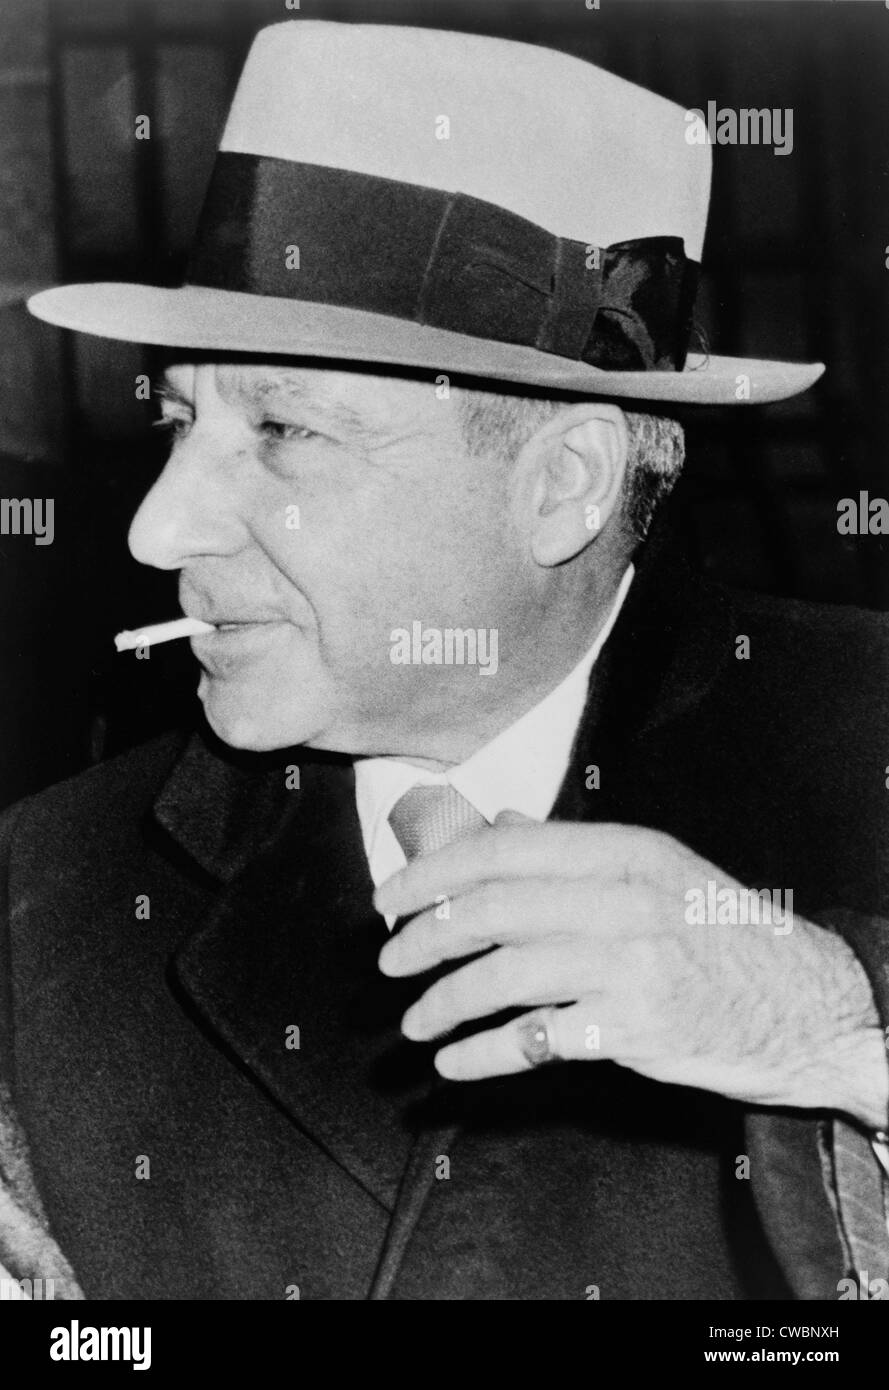 Meyer Lansky (1902-1983), reached the executive level in the mob and managed to avoid prison throughout his life.  Lansky was Stock Photo